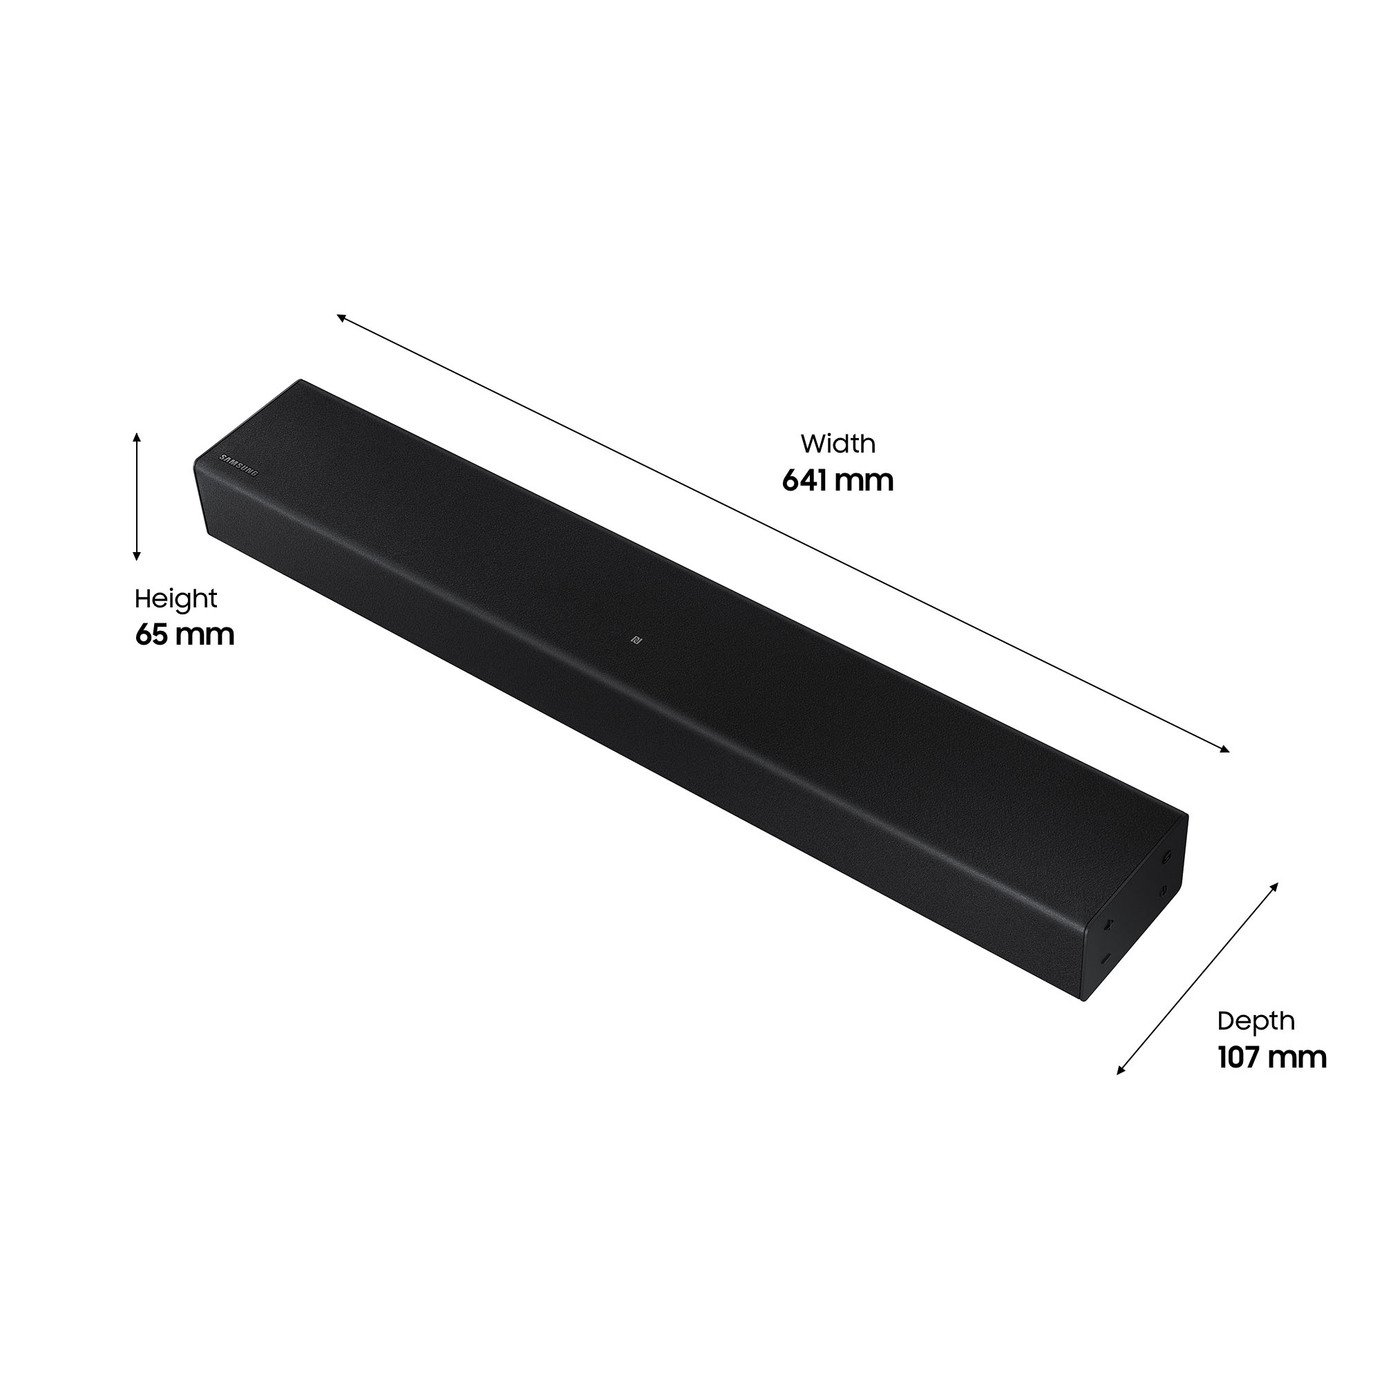 Samsung HW-T400 2.0Ch All-In-One Sound Bar Review